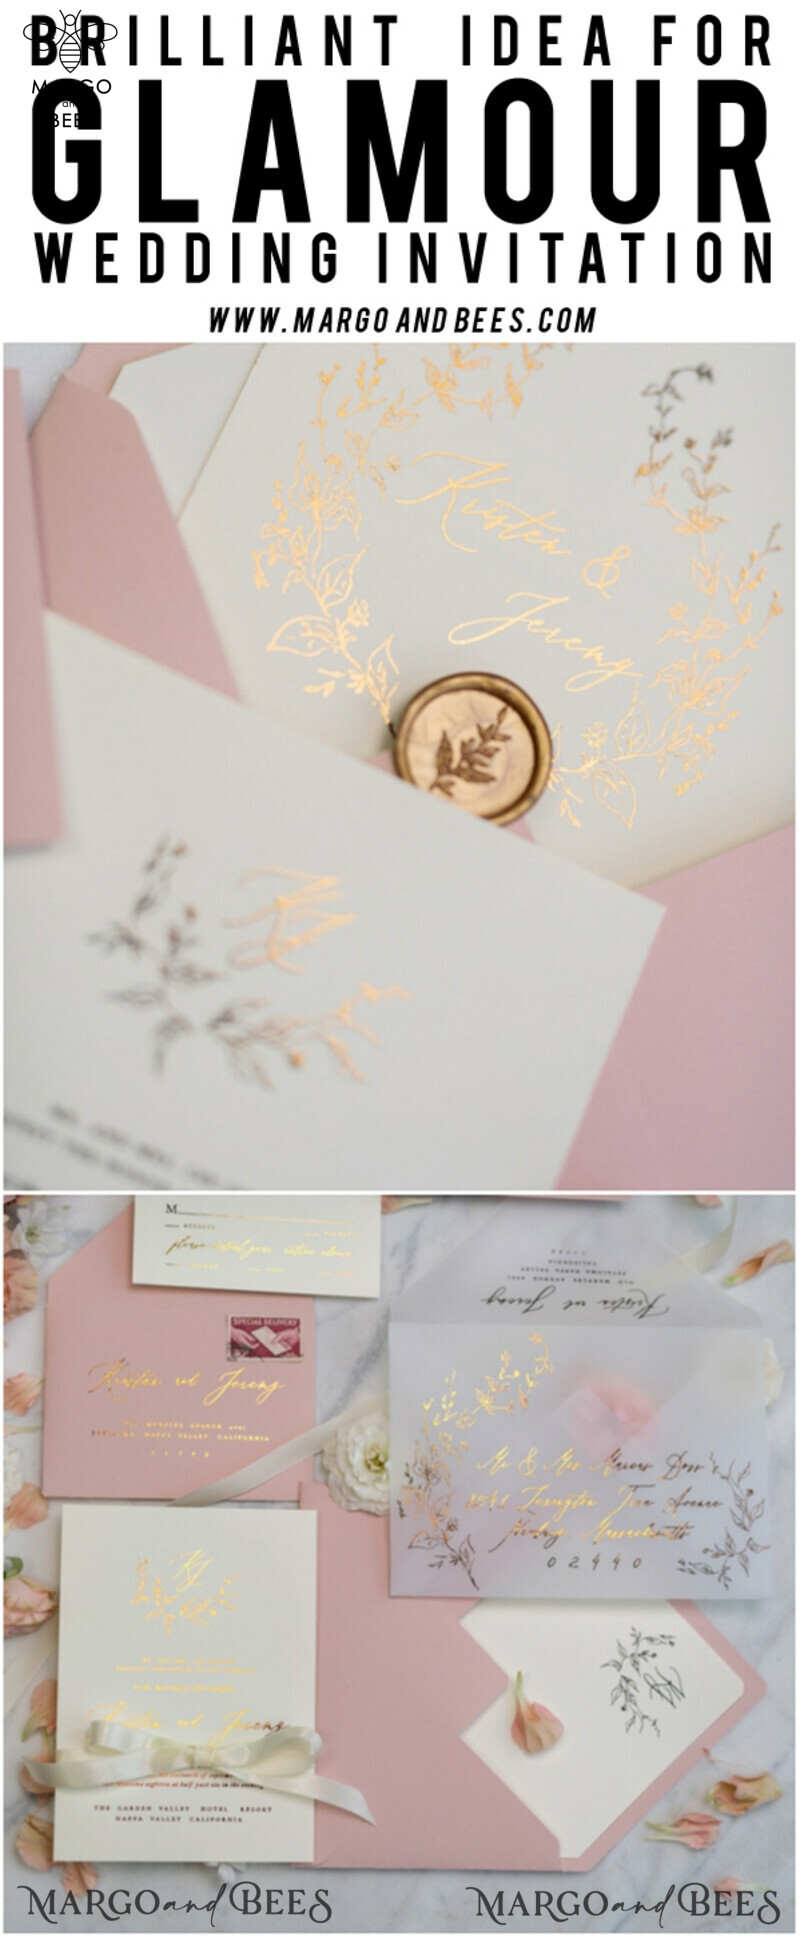 Bespoke Vellum Wedding Invitation Suite: Romantic Blush Pink and Glamour Gold Foil with Elegant Golden Touch-36